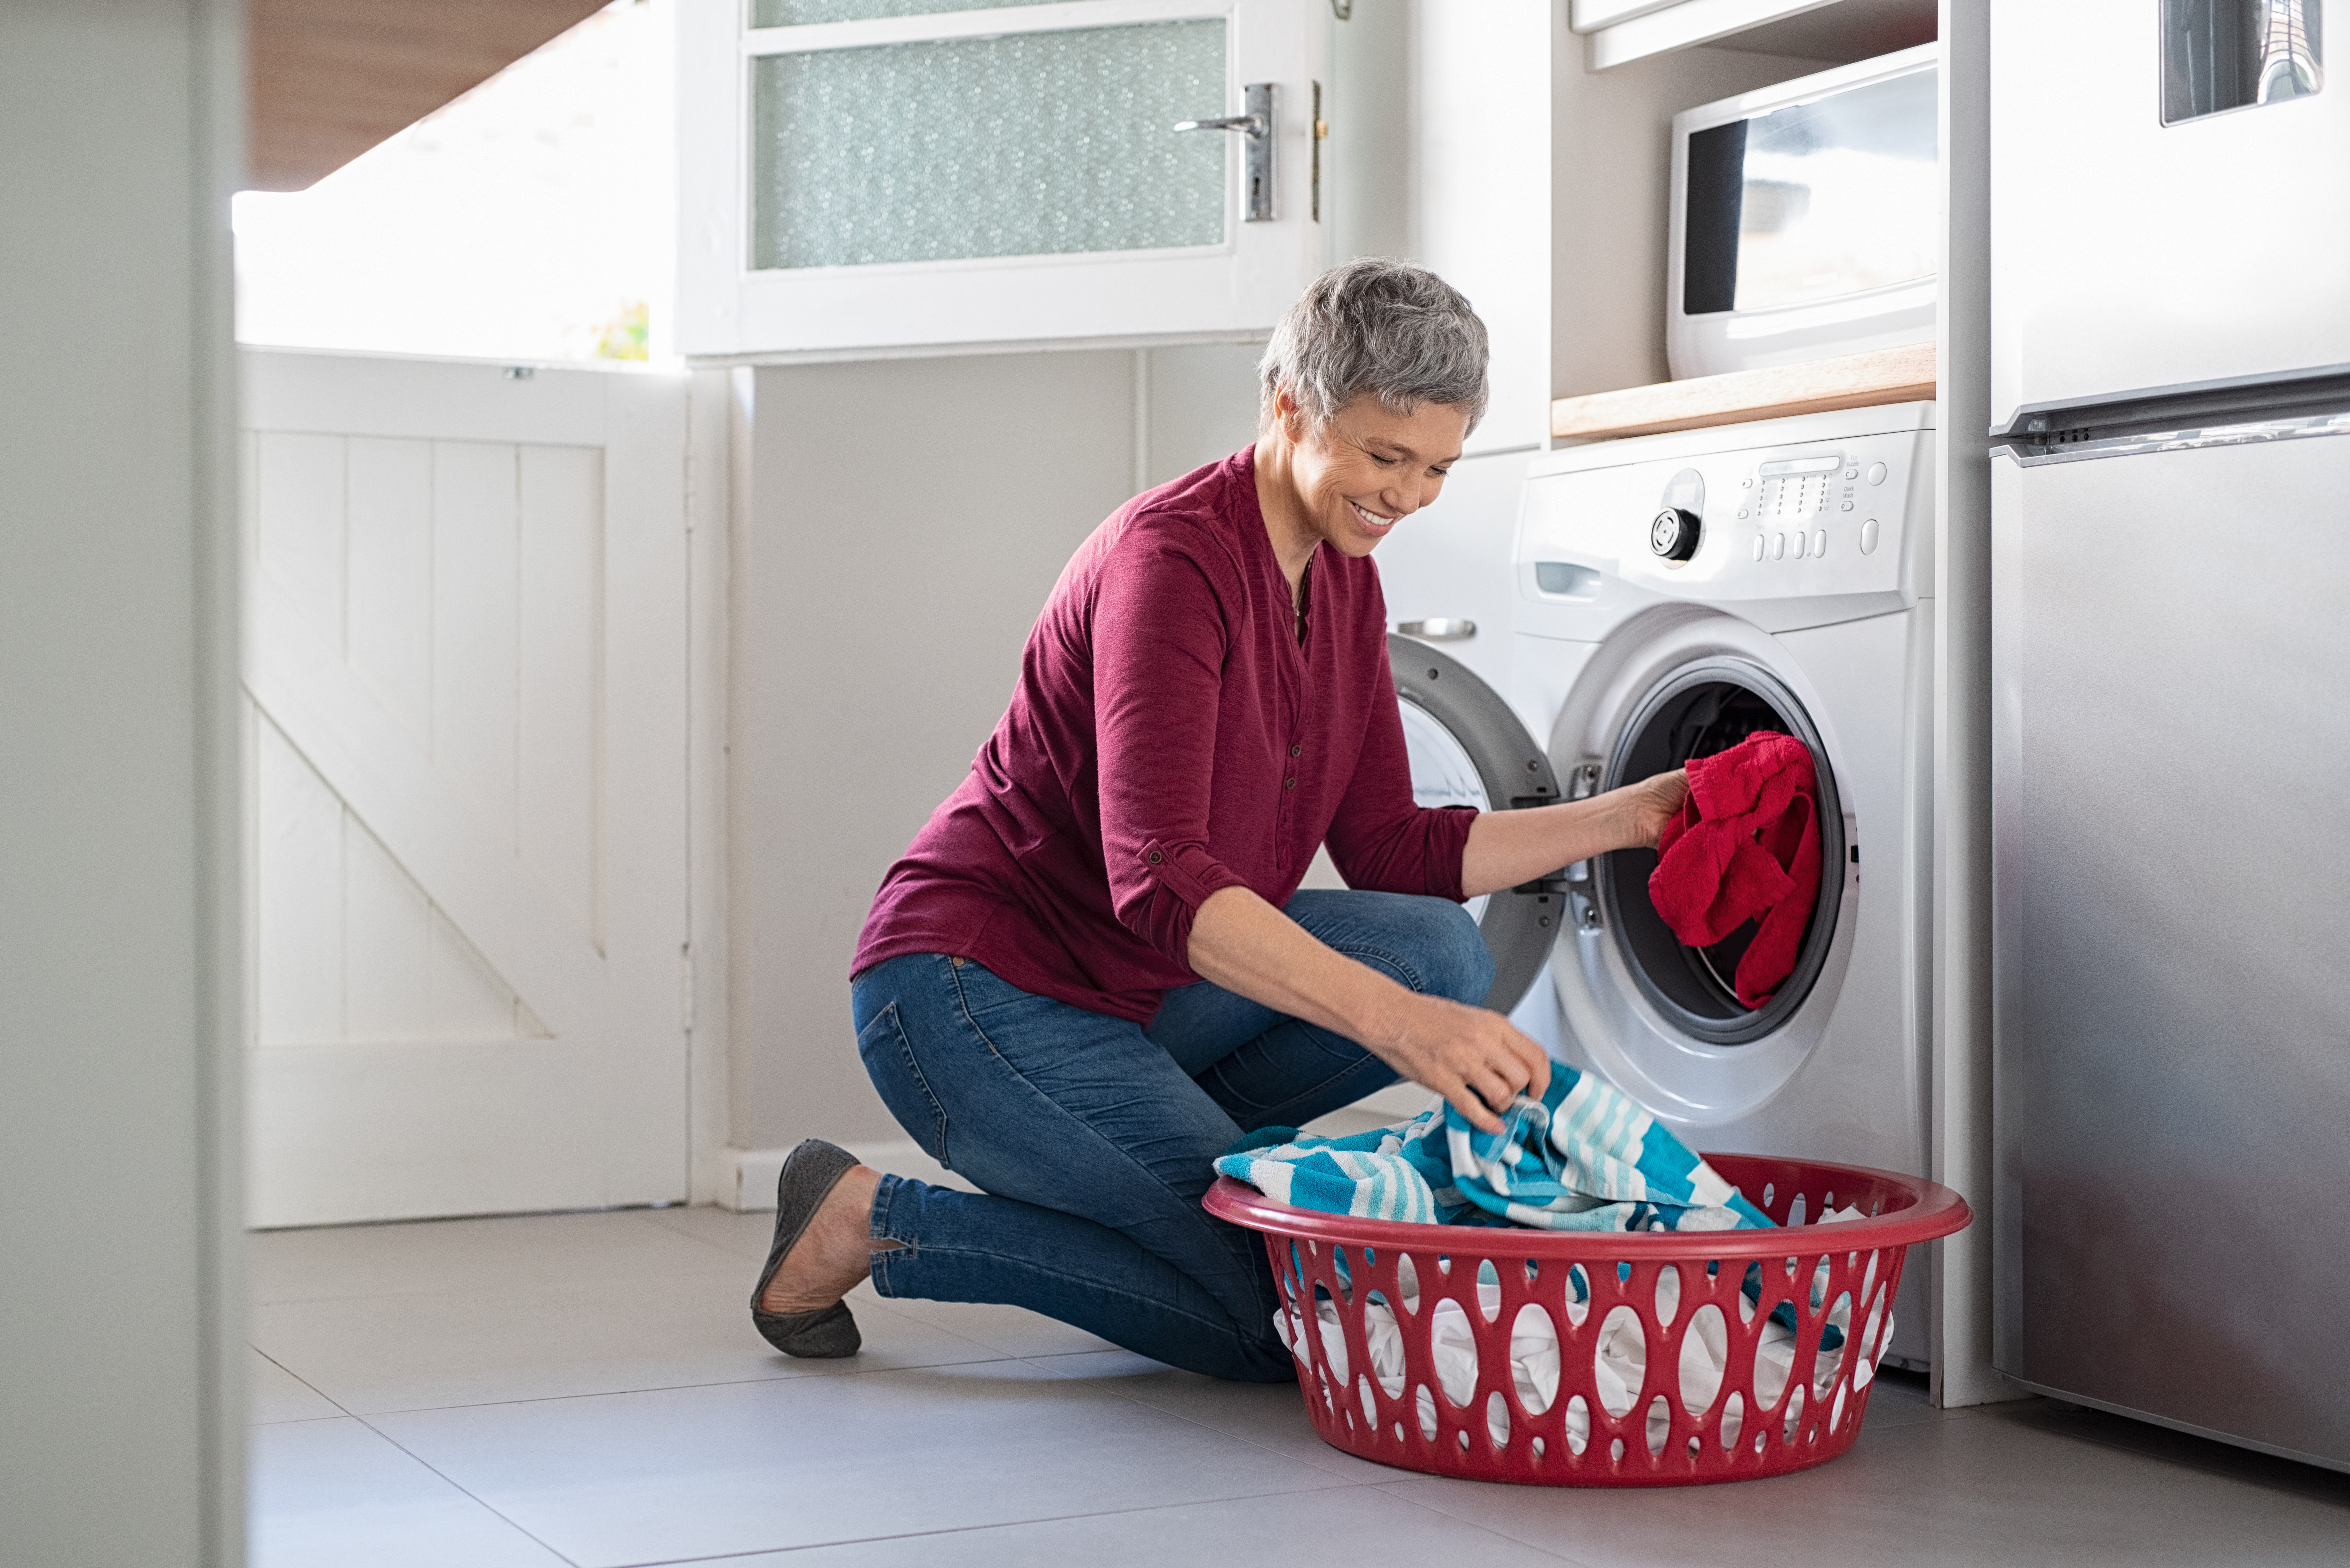  woman in burgundy shirt and jeans taking clothes our of front load washer